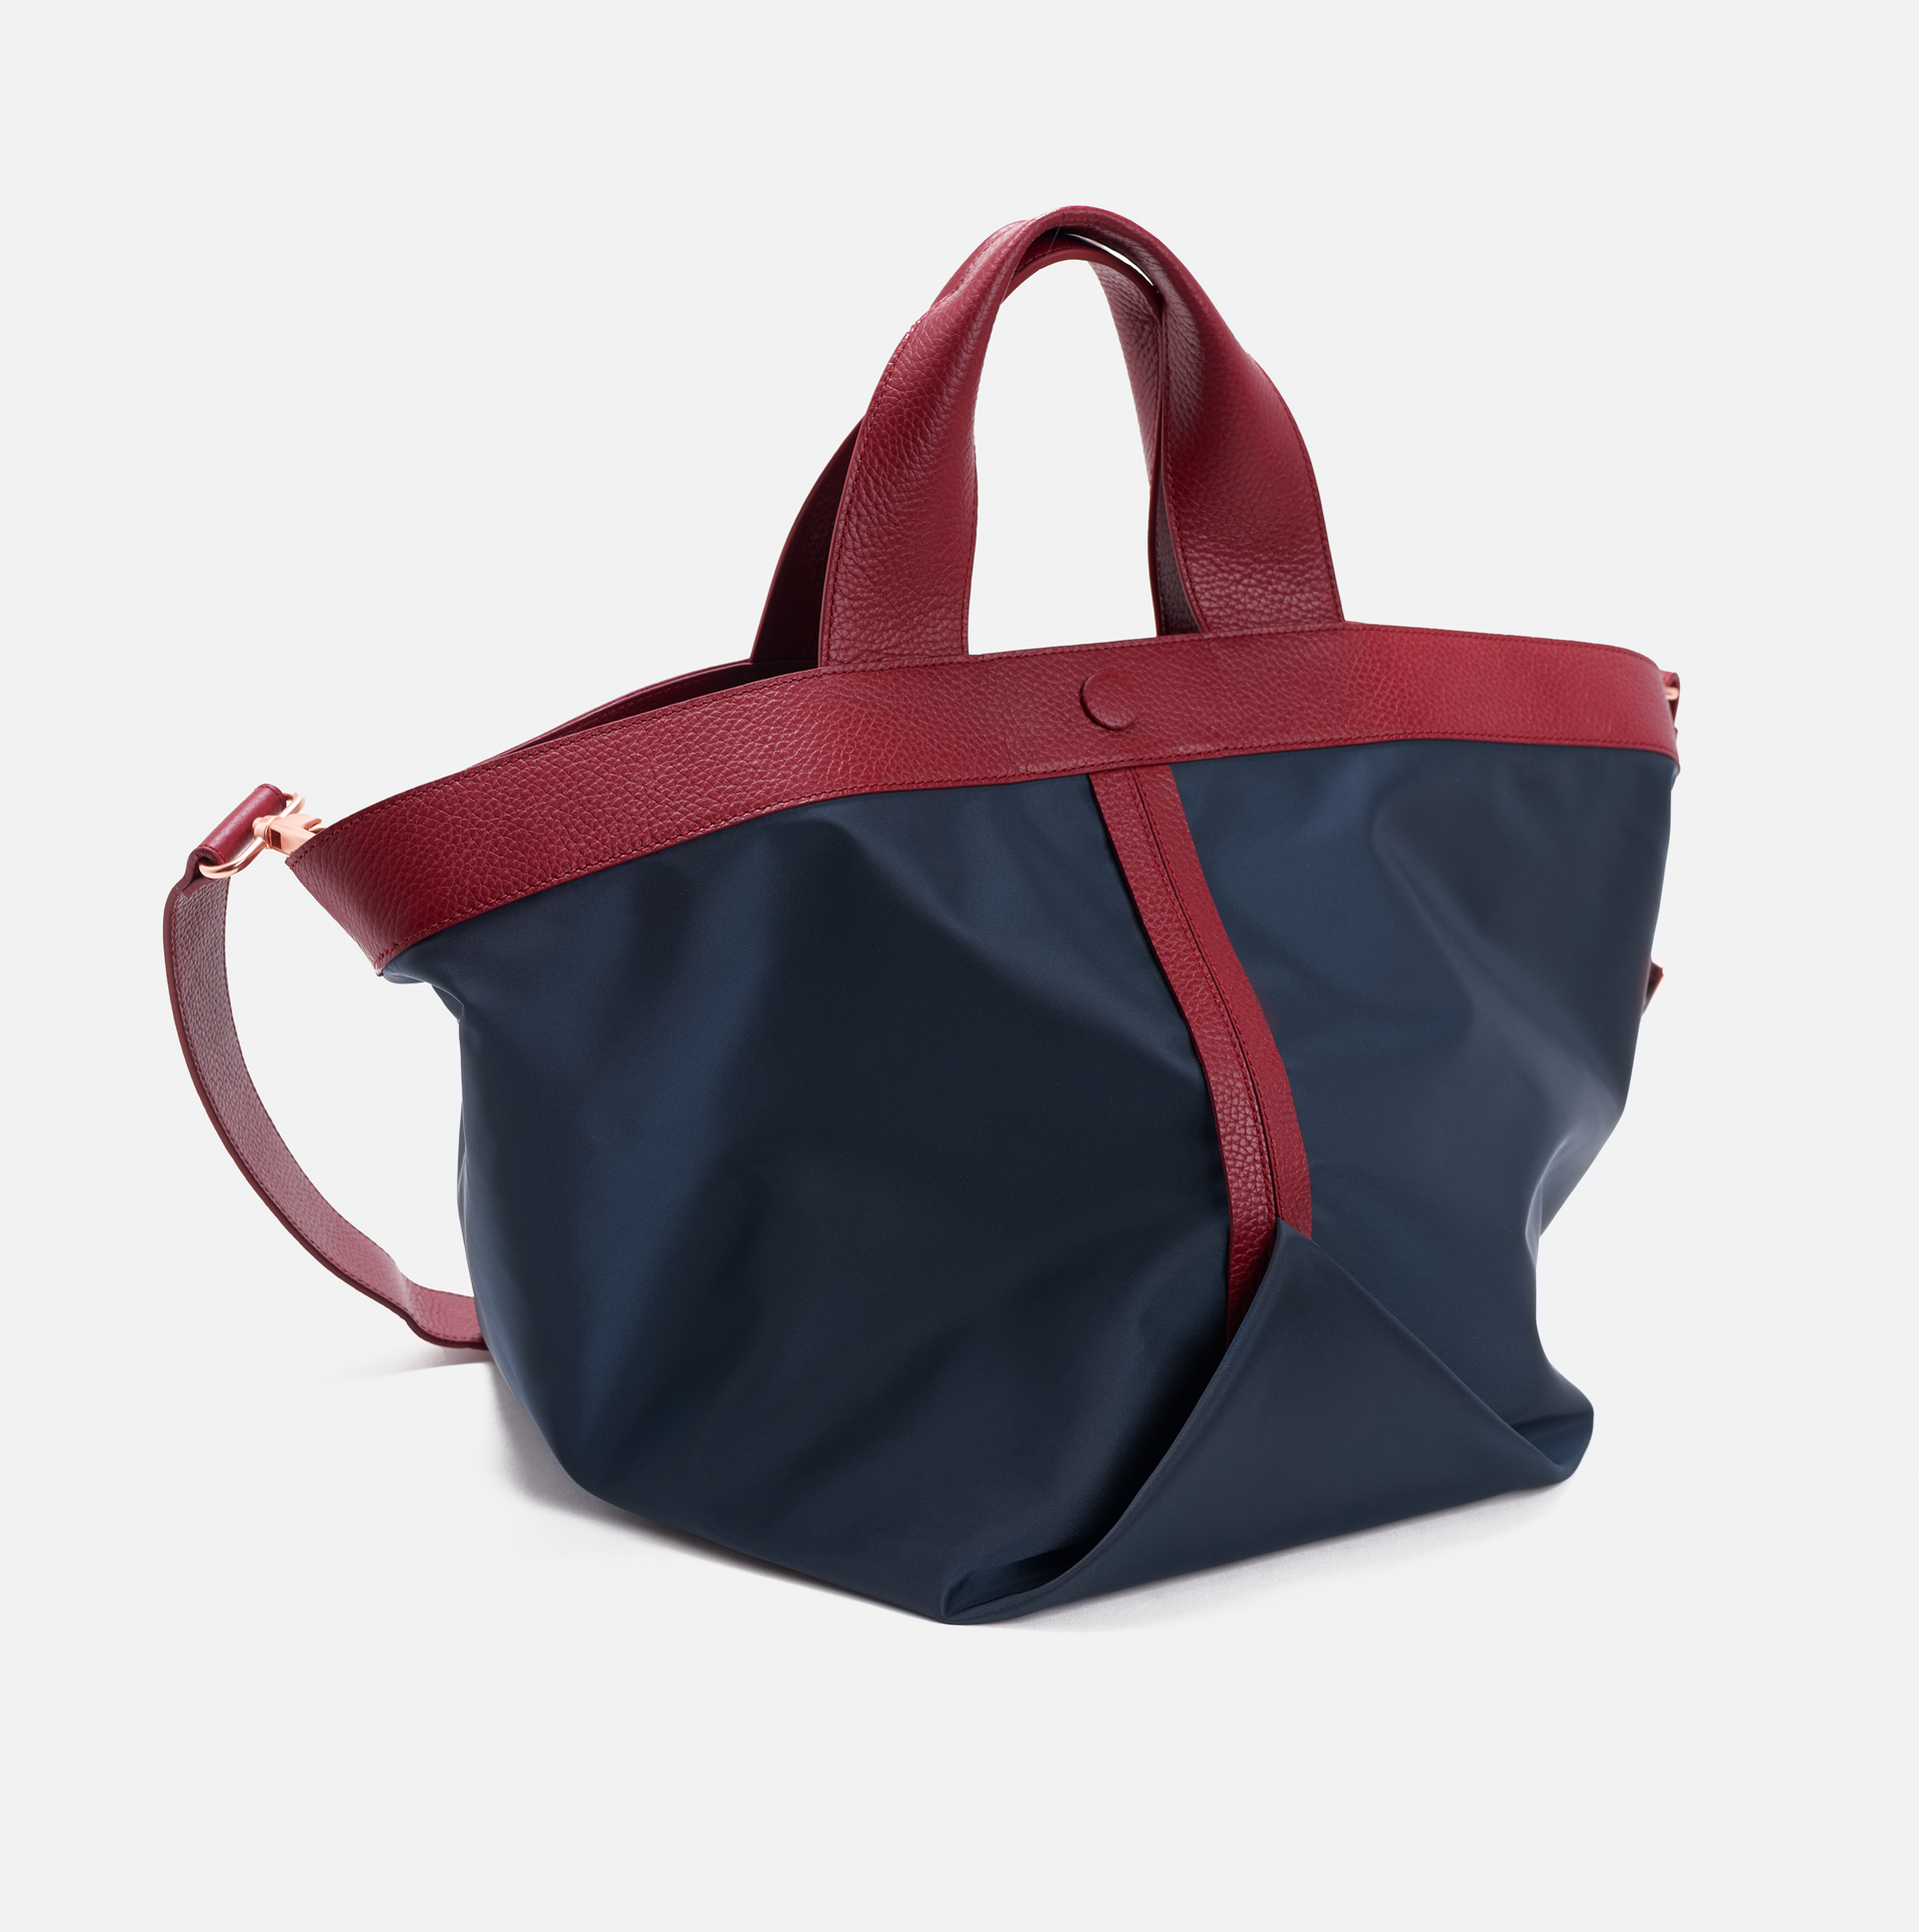 Gusset large nylon tote with pebble leather trim in navy / burgundy